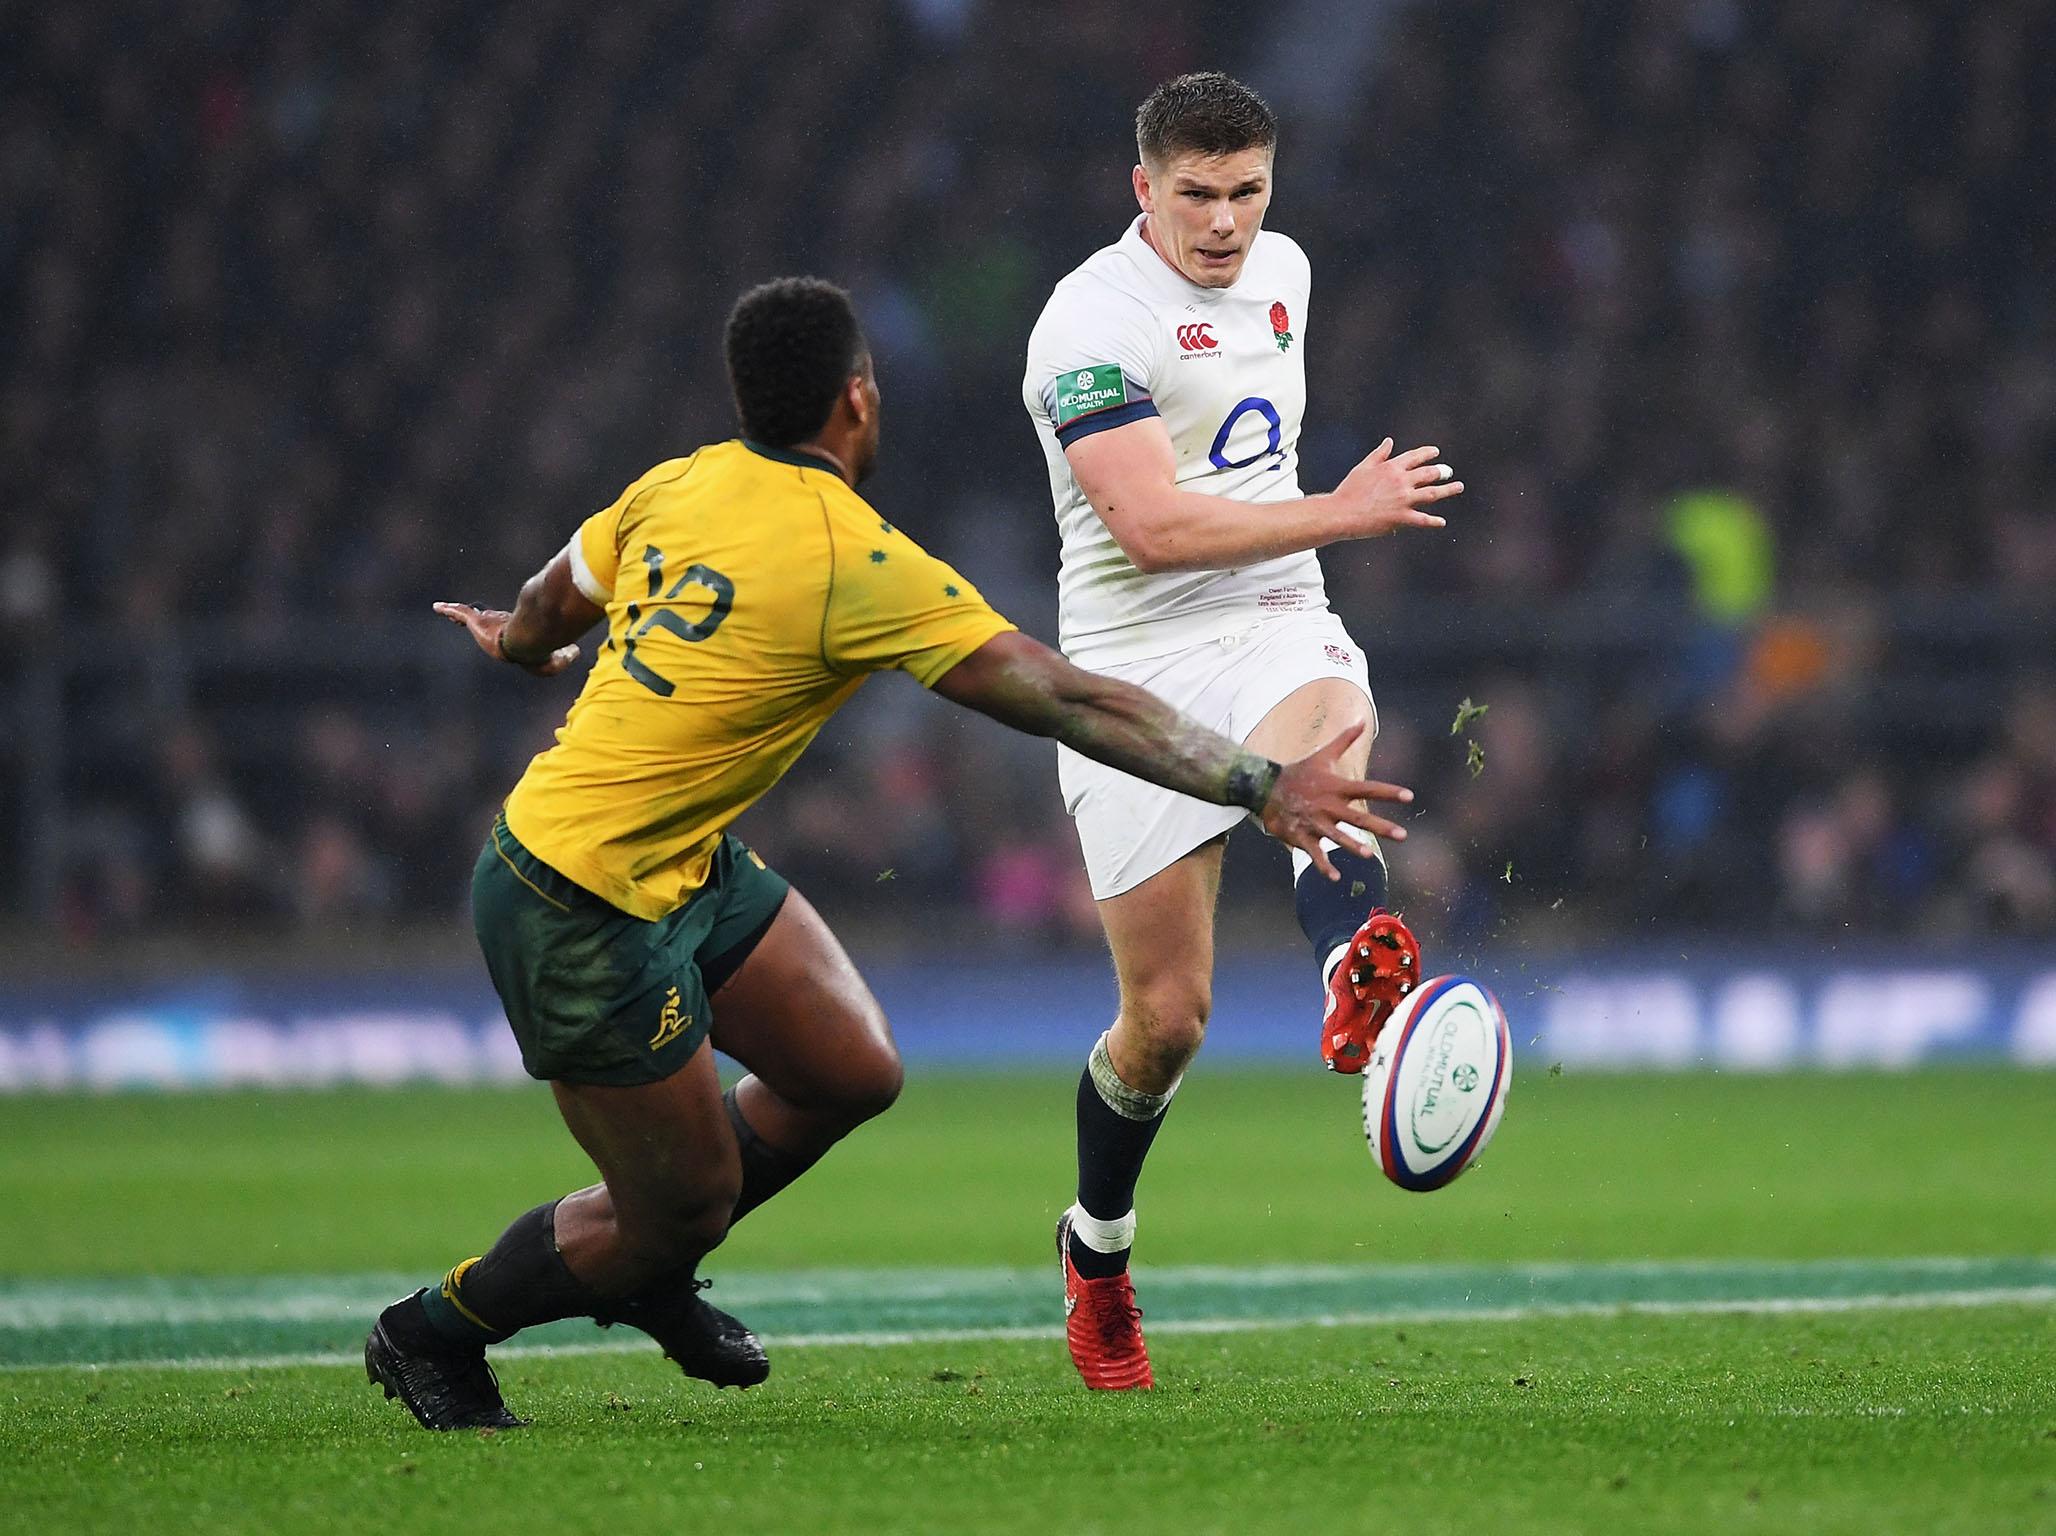 England's familiarity at playing Australia can give them an edge, says Farrell (Getty)